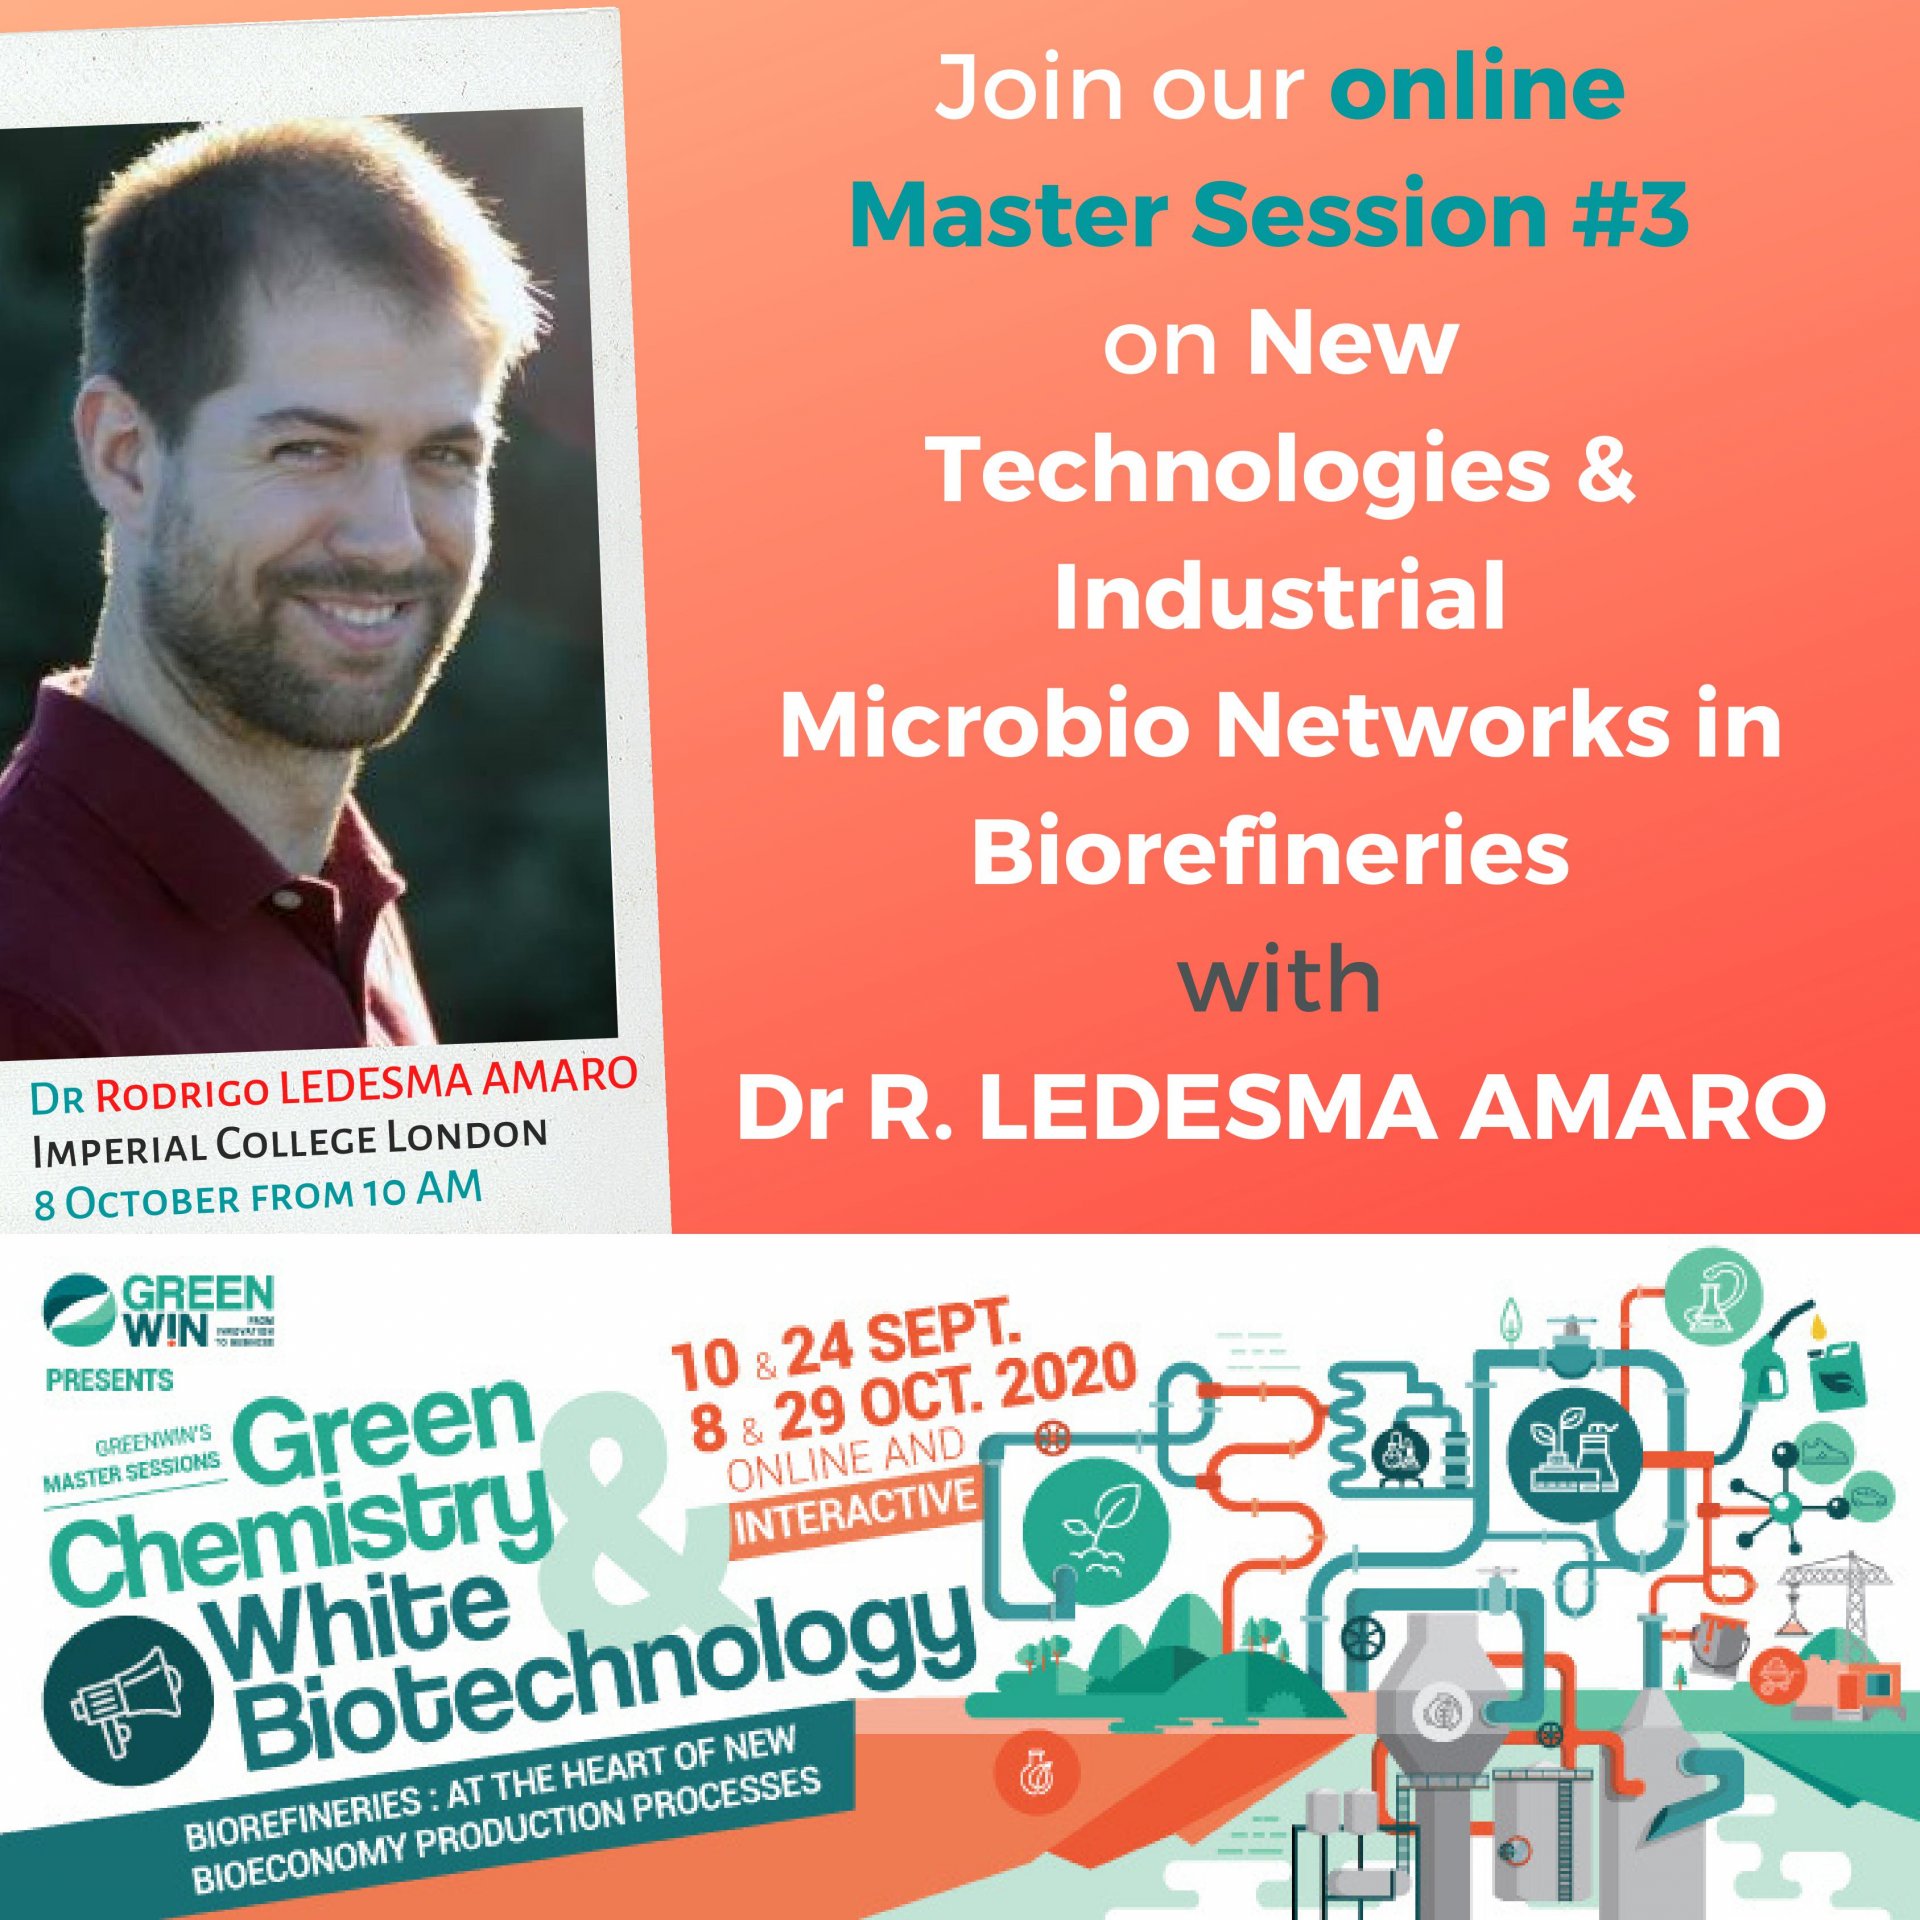 Meet Dr Rodrigo LEDESMA AMARO from Imperial College London on our online Master Session #3 on 8 October 2020 at 10AM